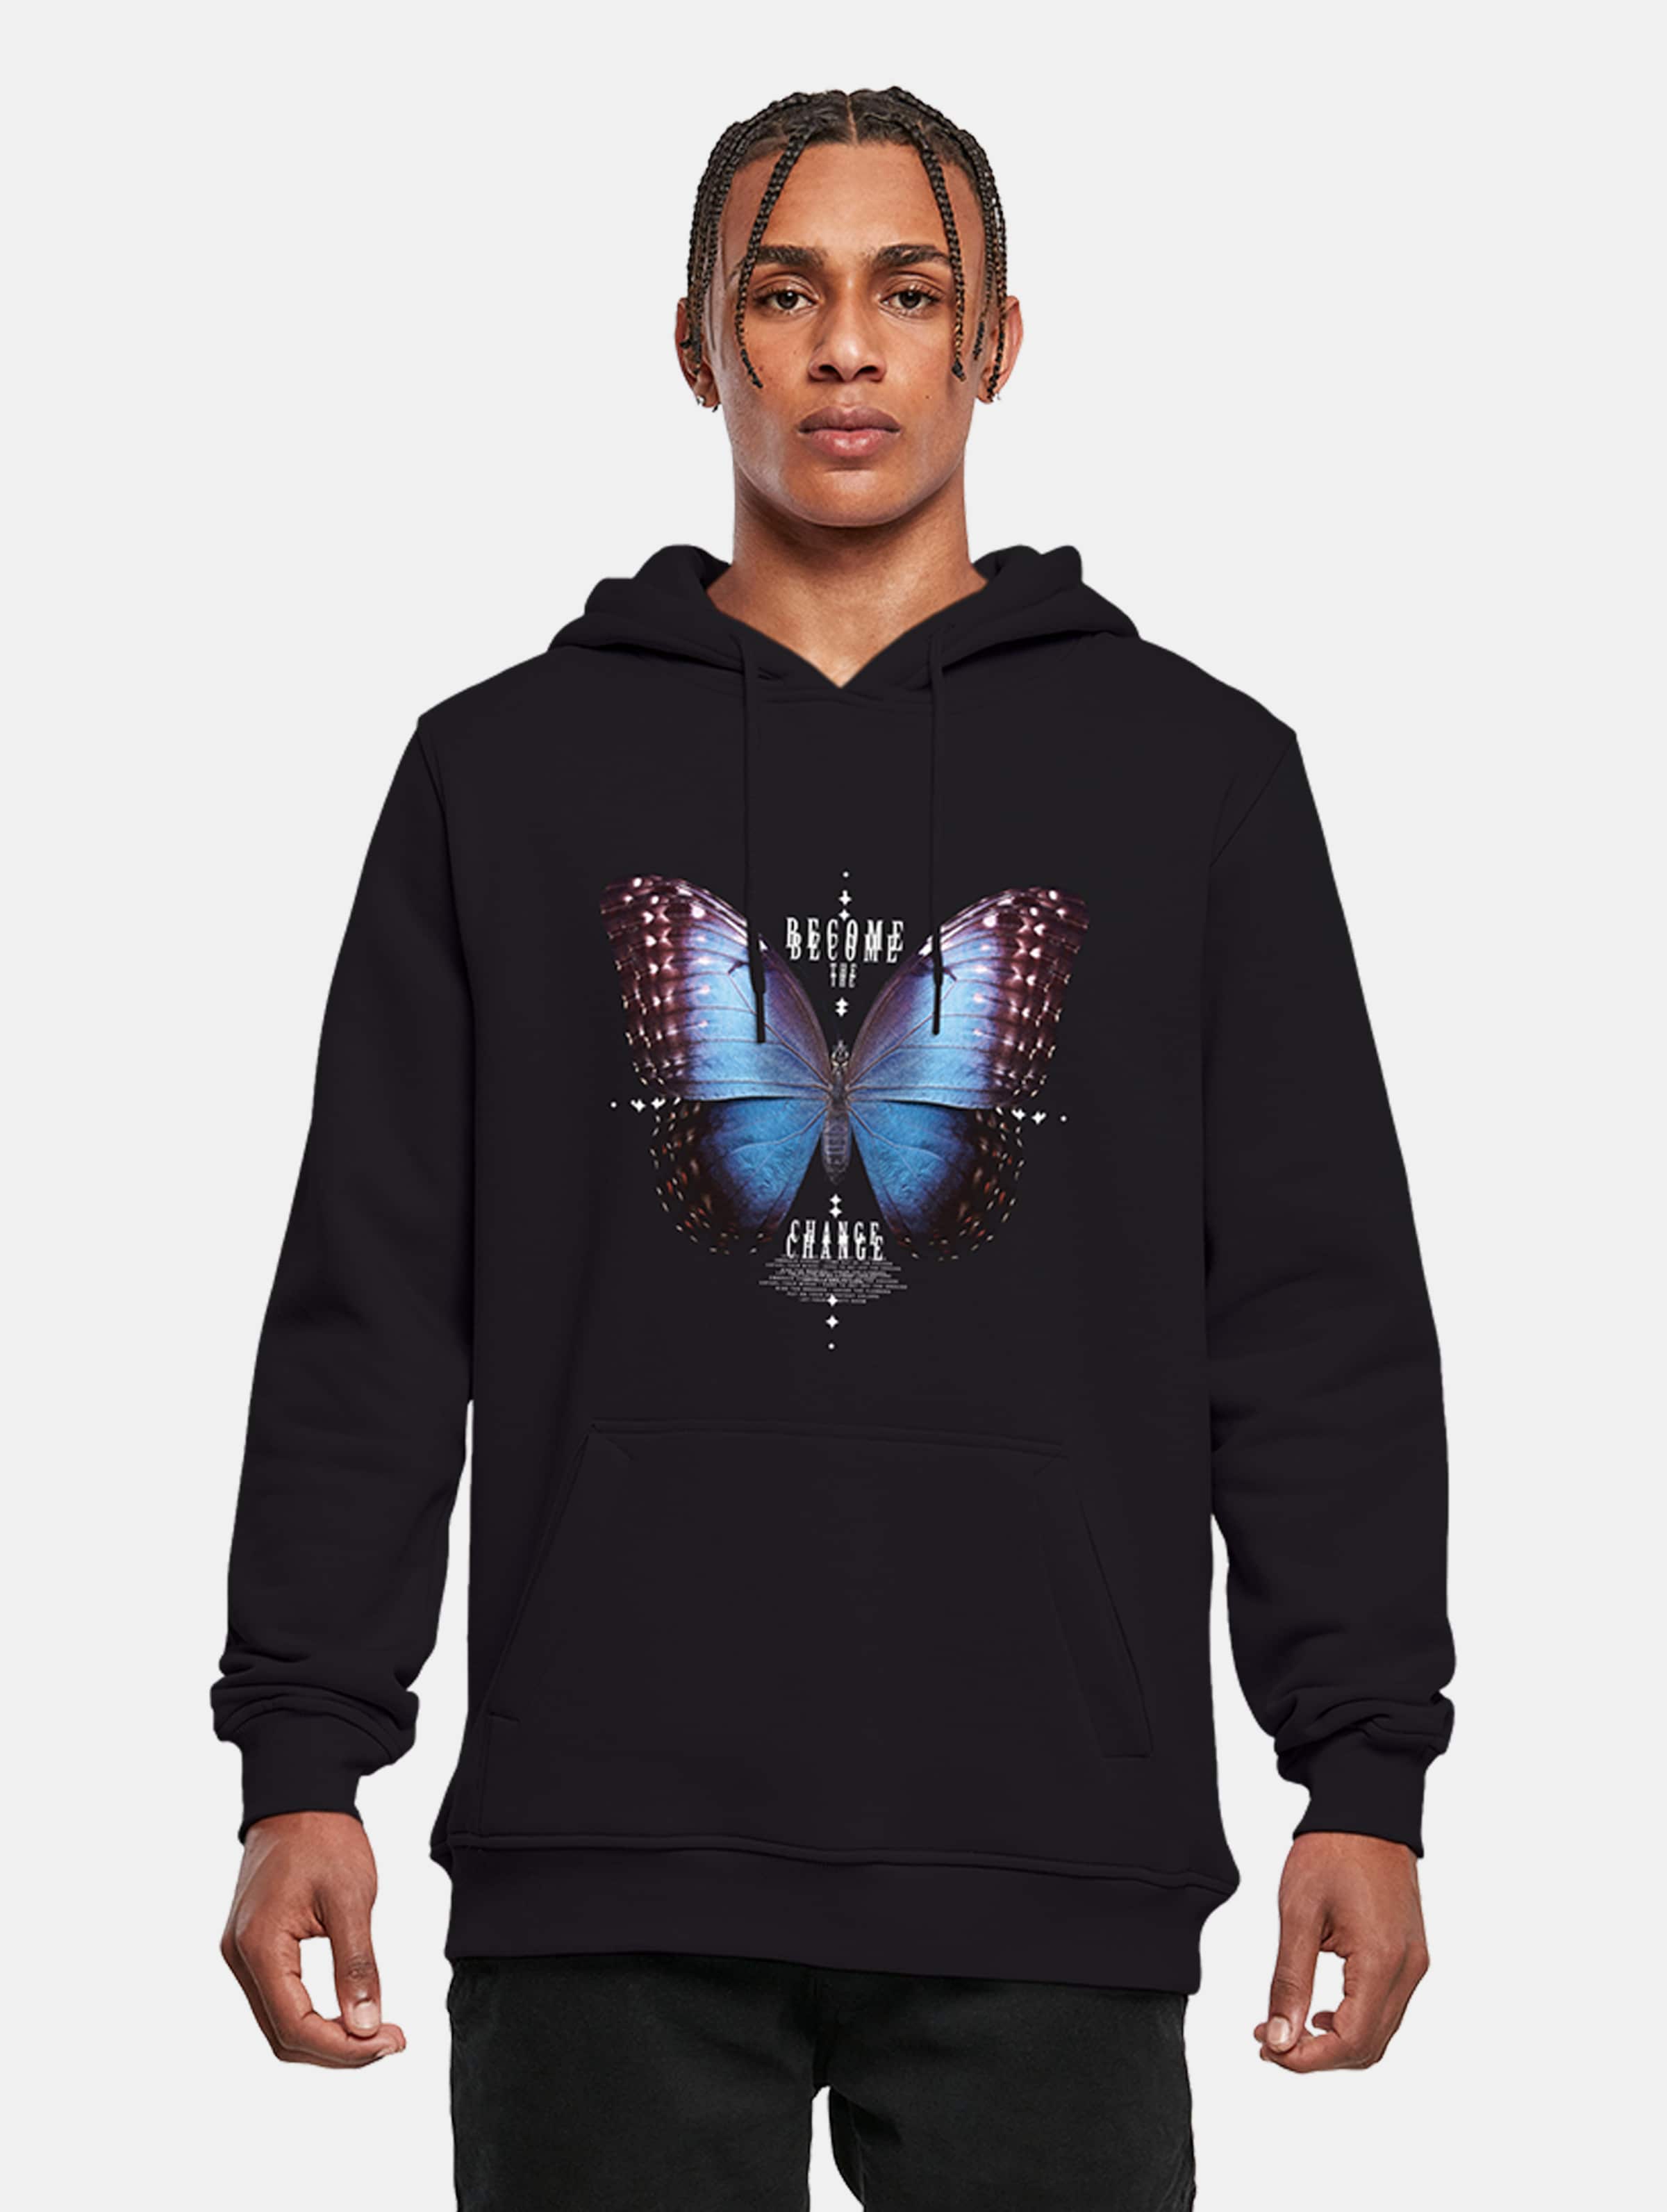 Mister Tee - Become The Change Butterfly Hoodie/trui - 5XL - Zwart